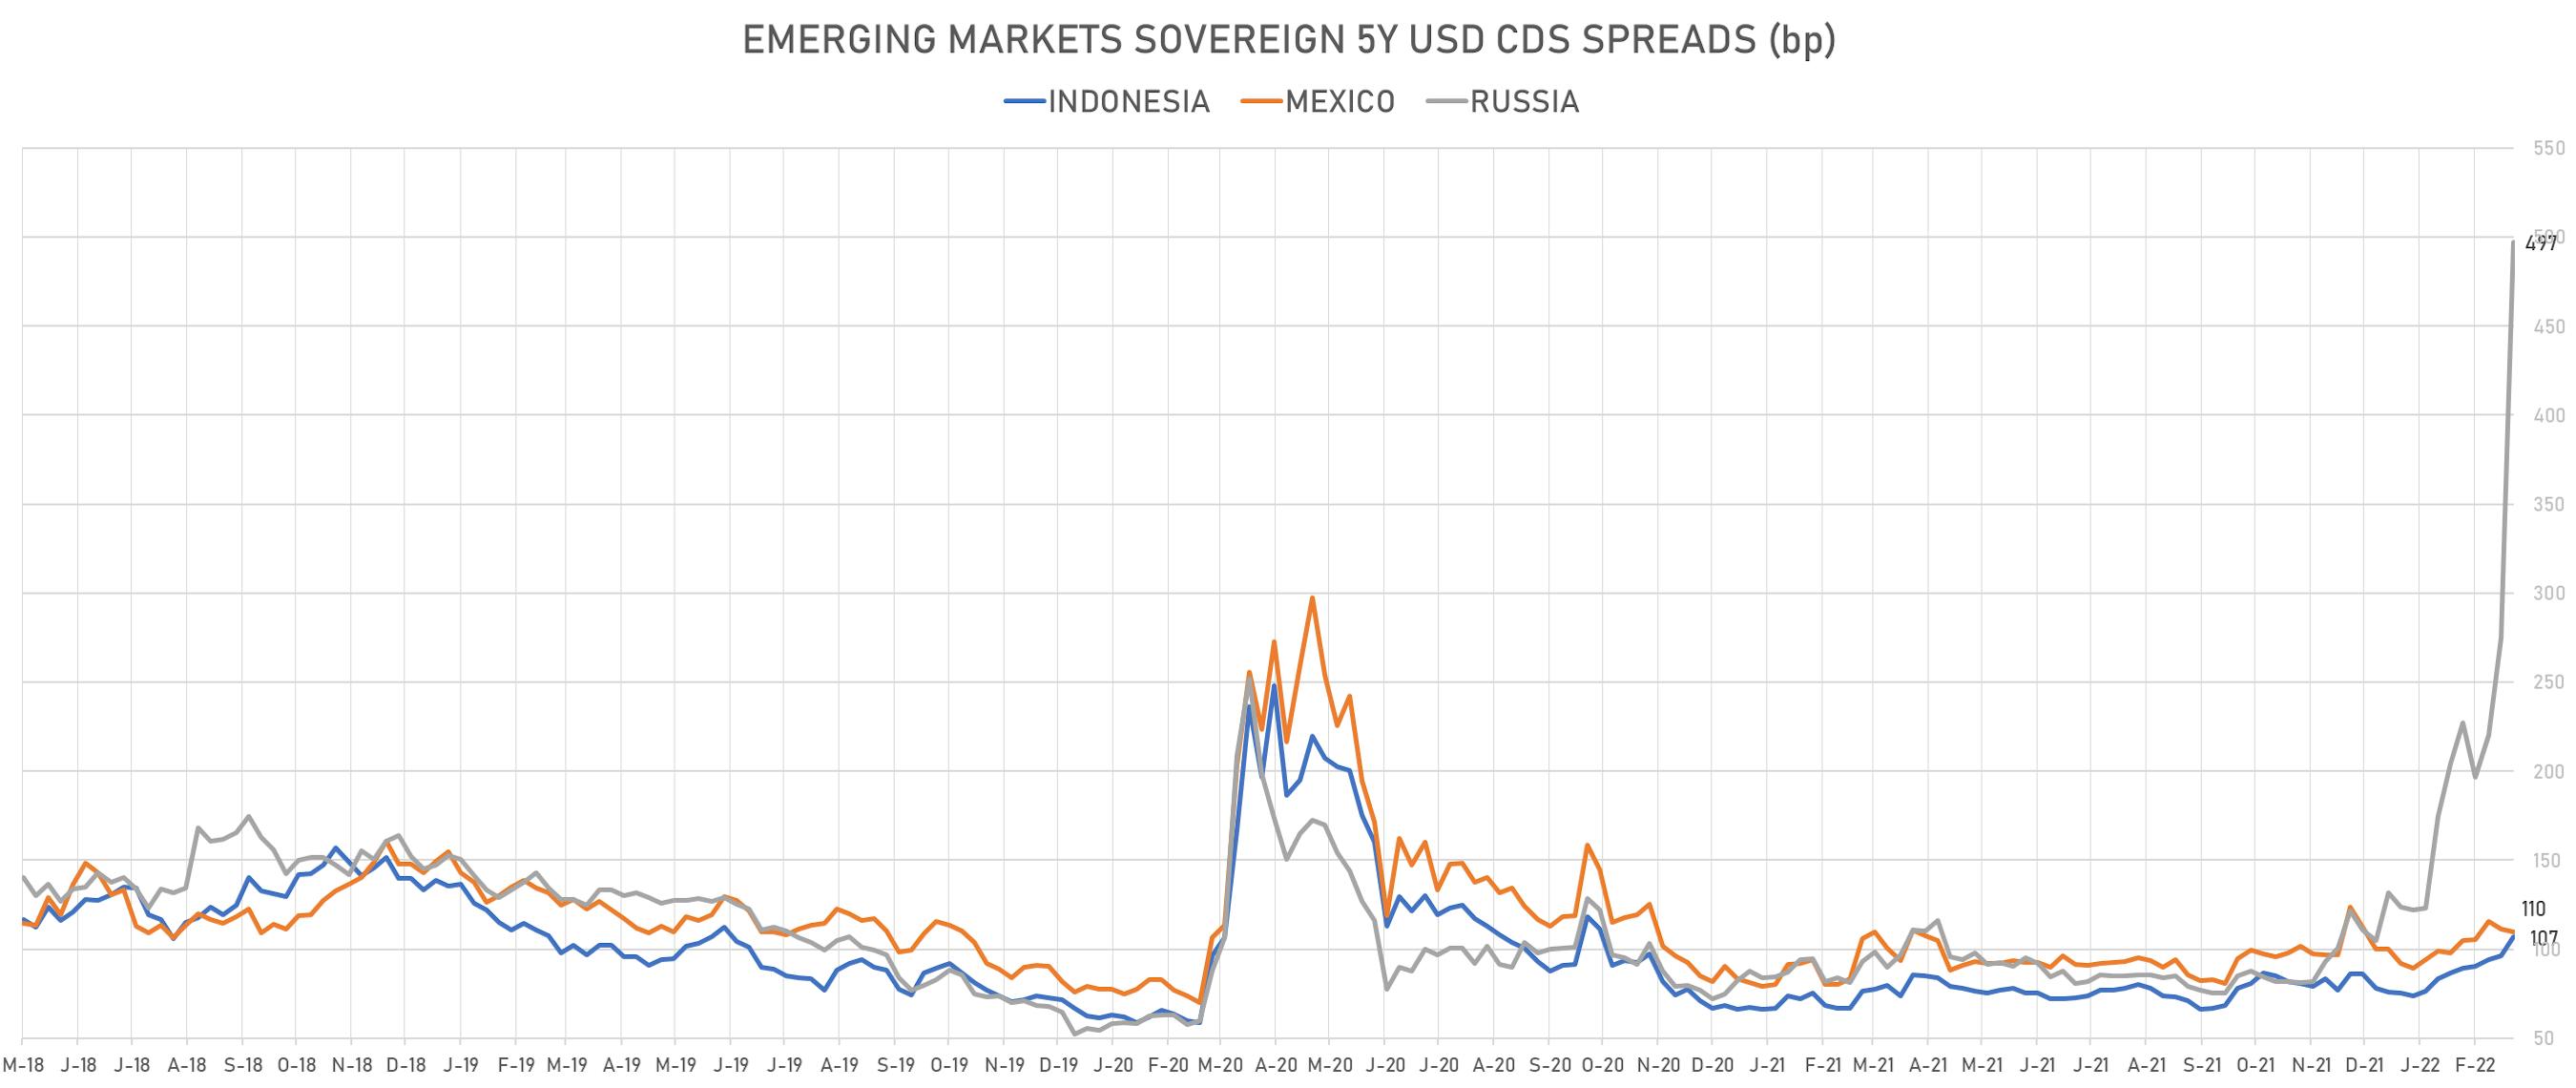 5Y USD CDS Spreads | Sources: phipost.com, Refinitiv weekly data 